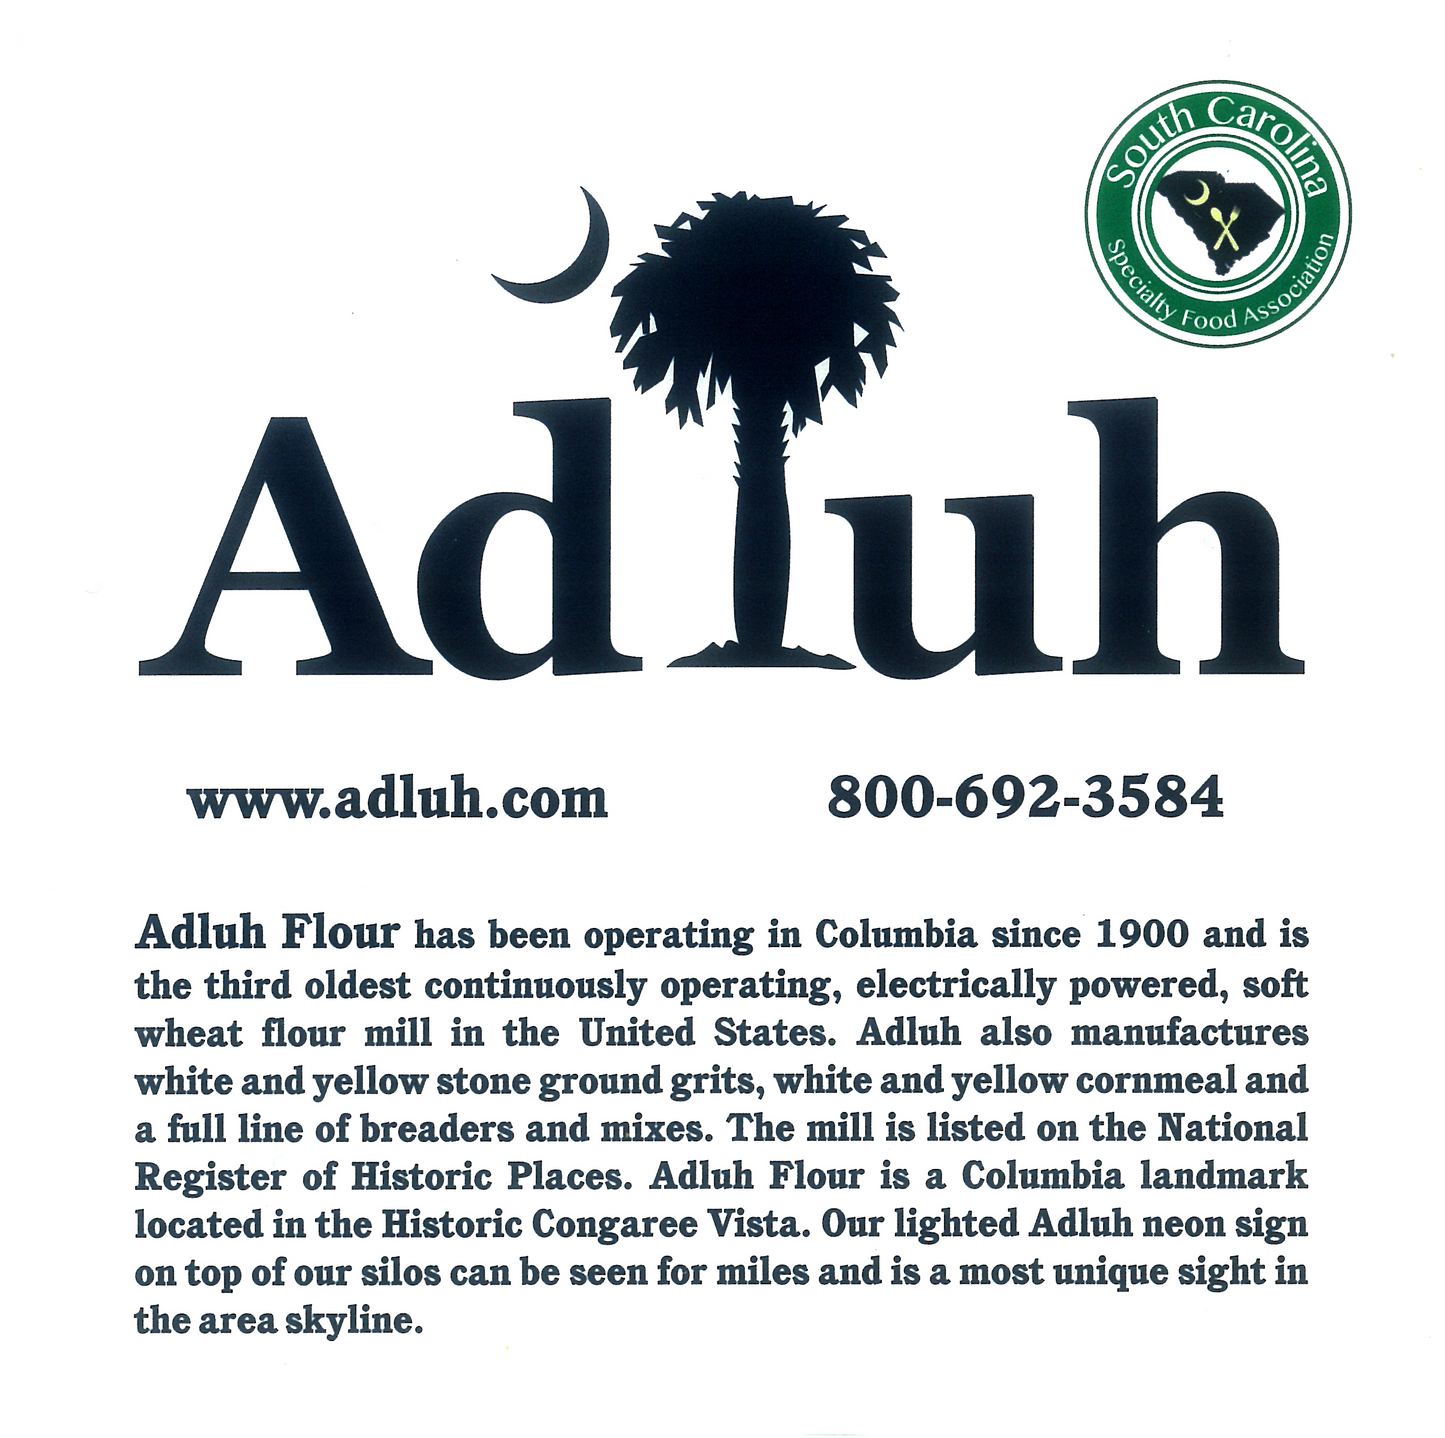 Adluh Sample Pack - Eight 1 pound bags